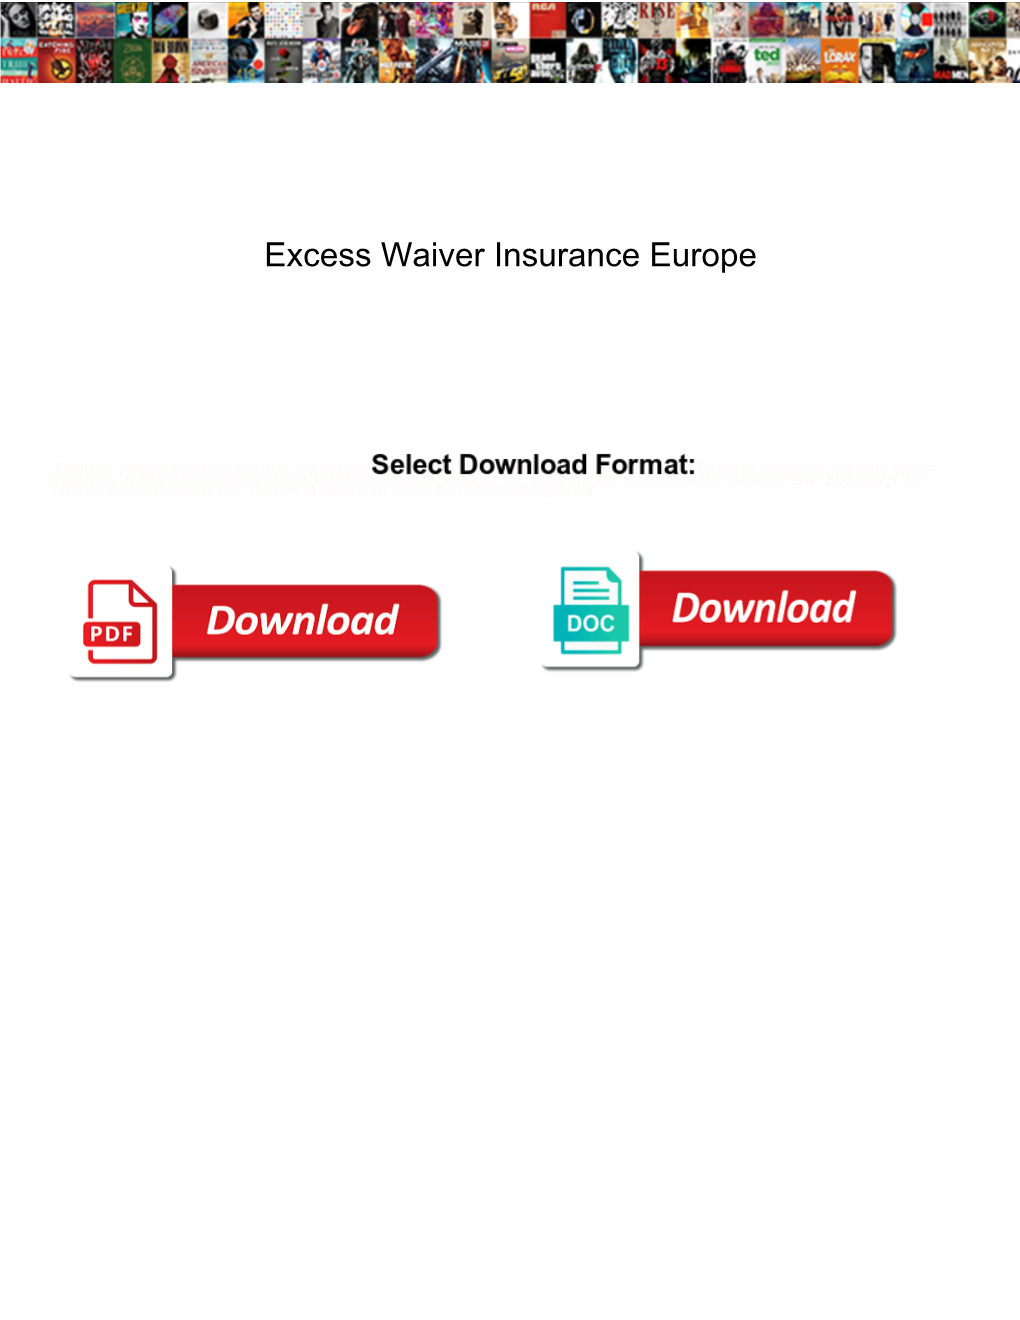 Excess Waiver Insurance Europe